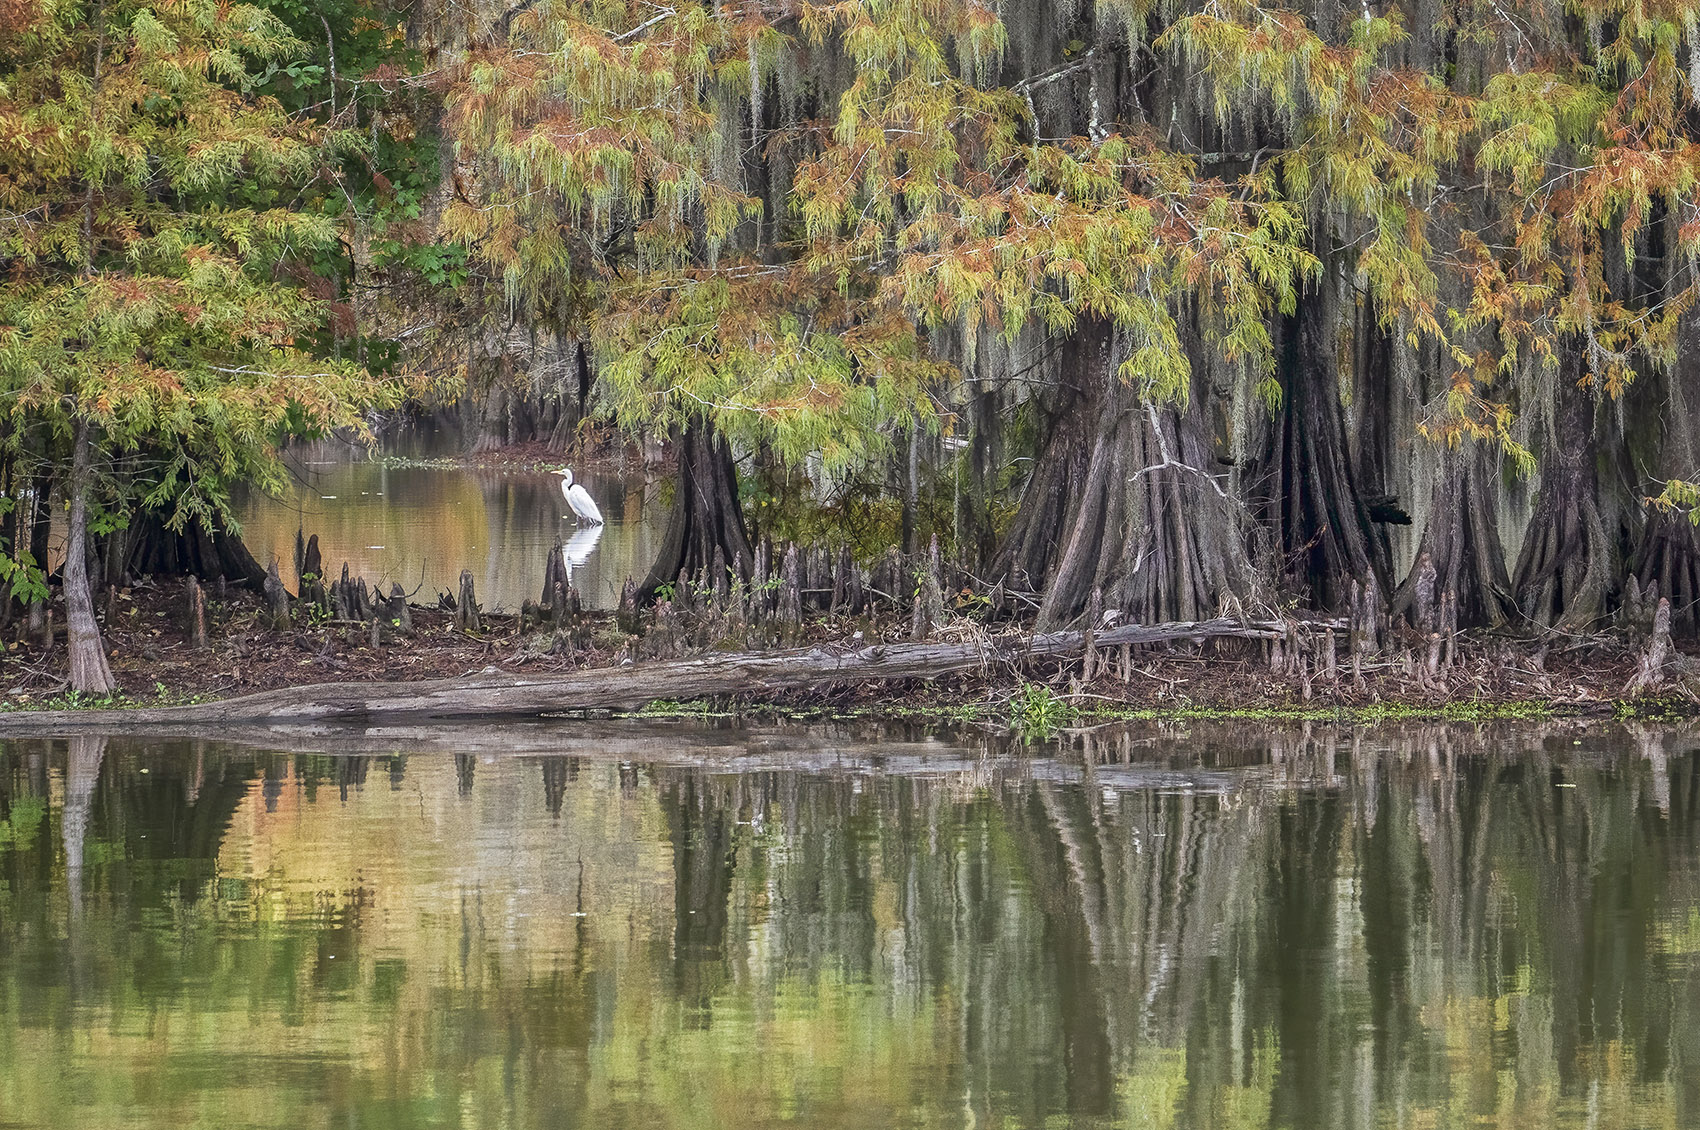 autumn leaves bald cypress trees in swamp with white egret in background